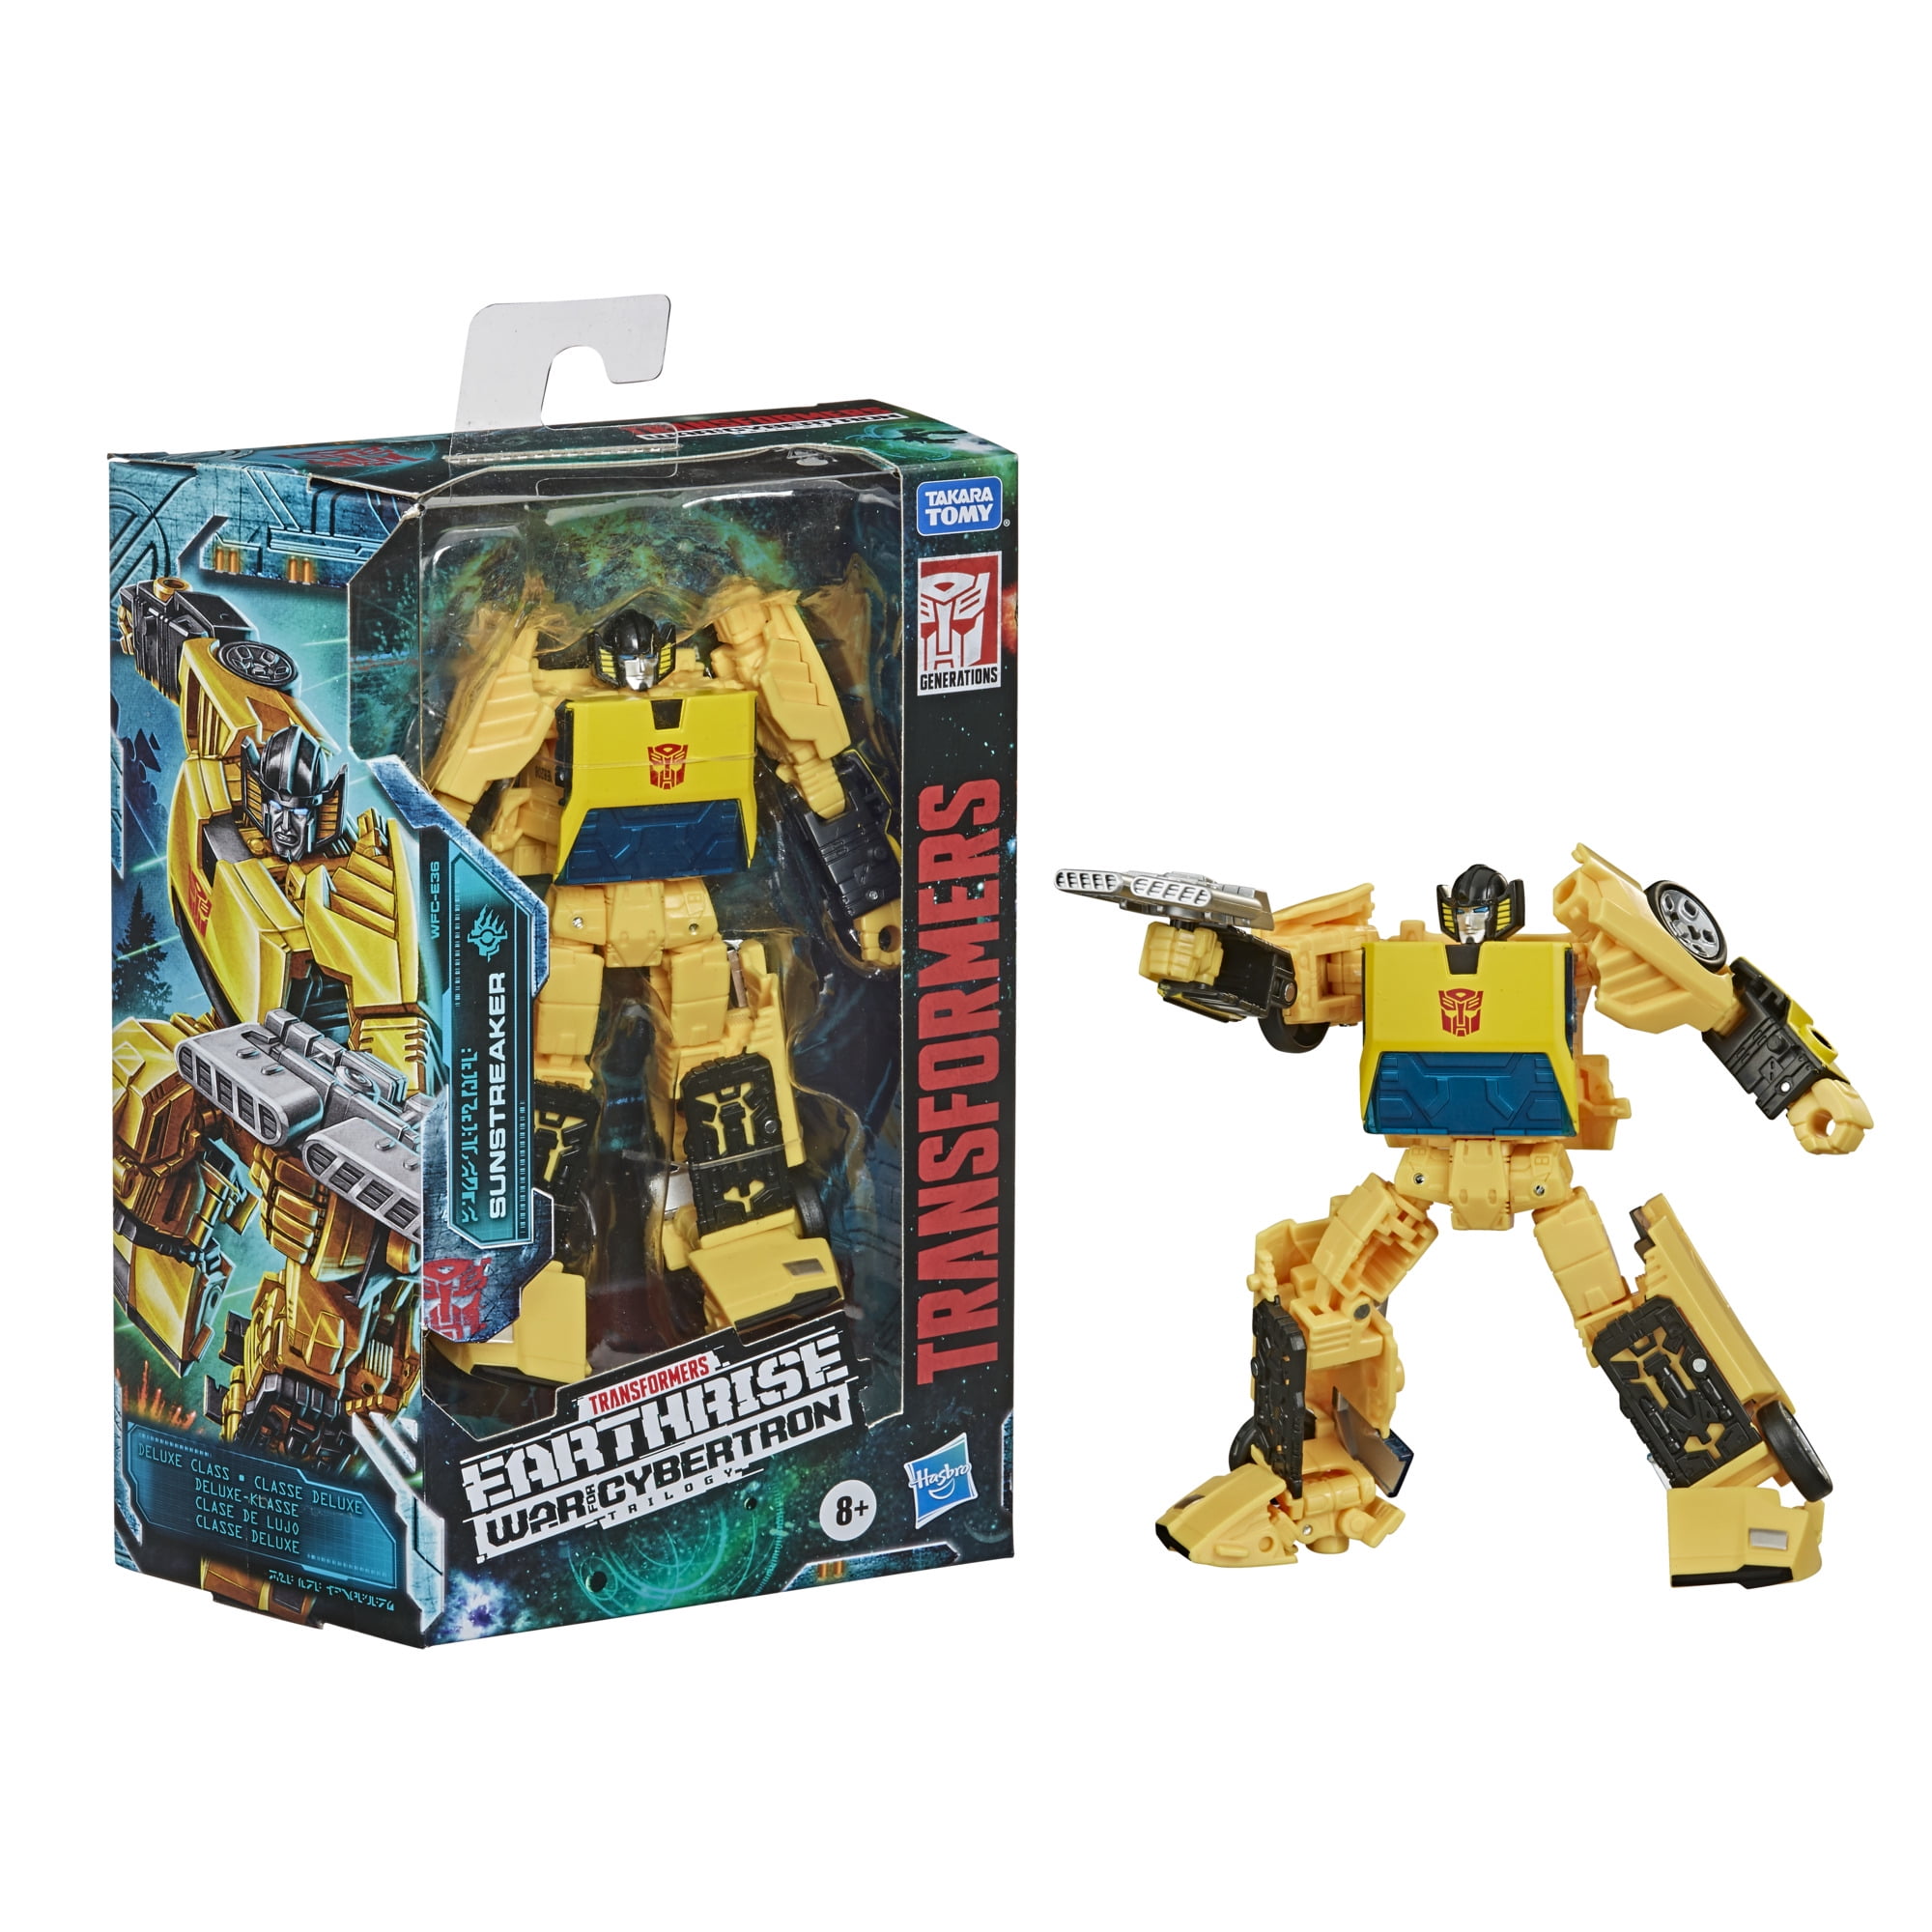 Details about   Hasbro Transformers War For Cybertron Earthrise Sunstreaker Deluxe Action Figure 